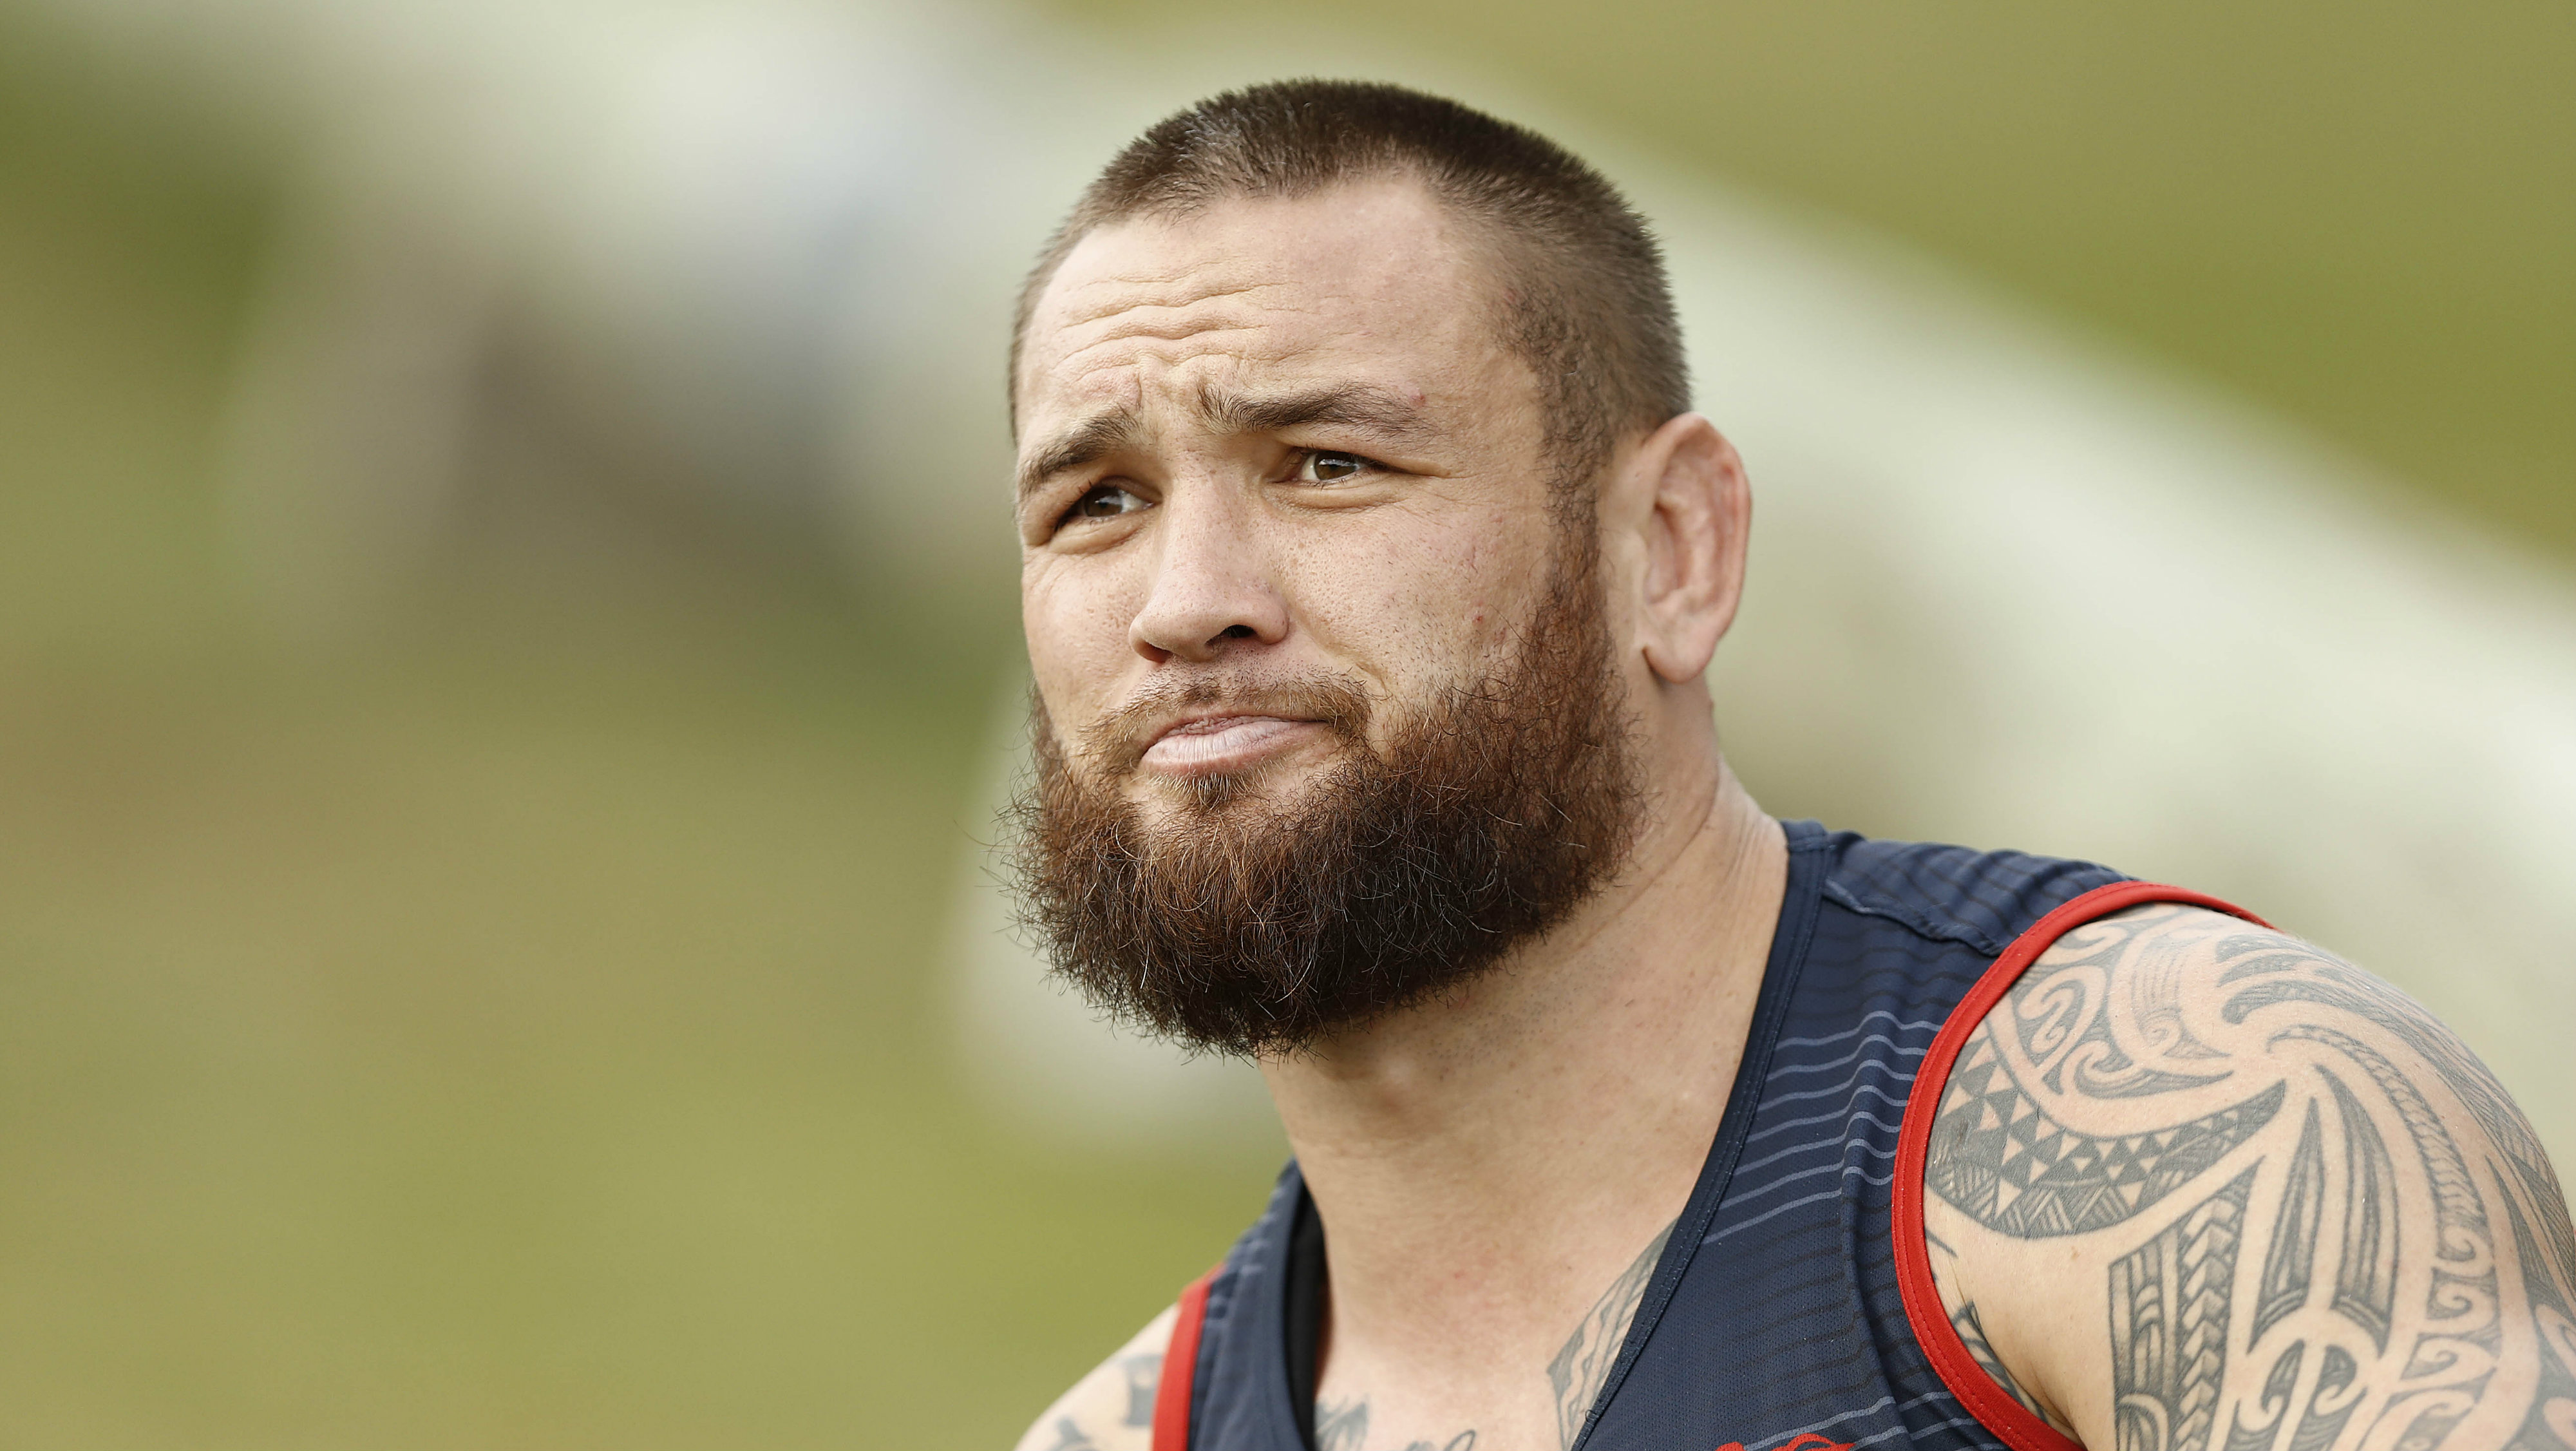 Jared Waerea-Hargreaves: Sydney Roosters prop successfully fights dangerous contact ...4000 x 2253